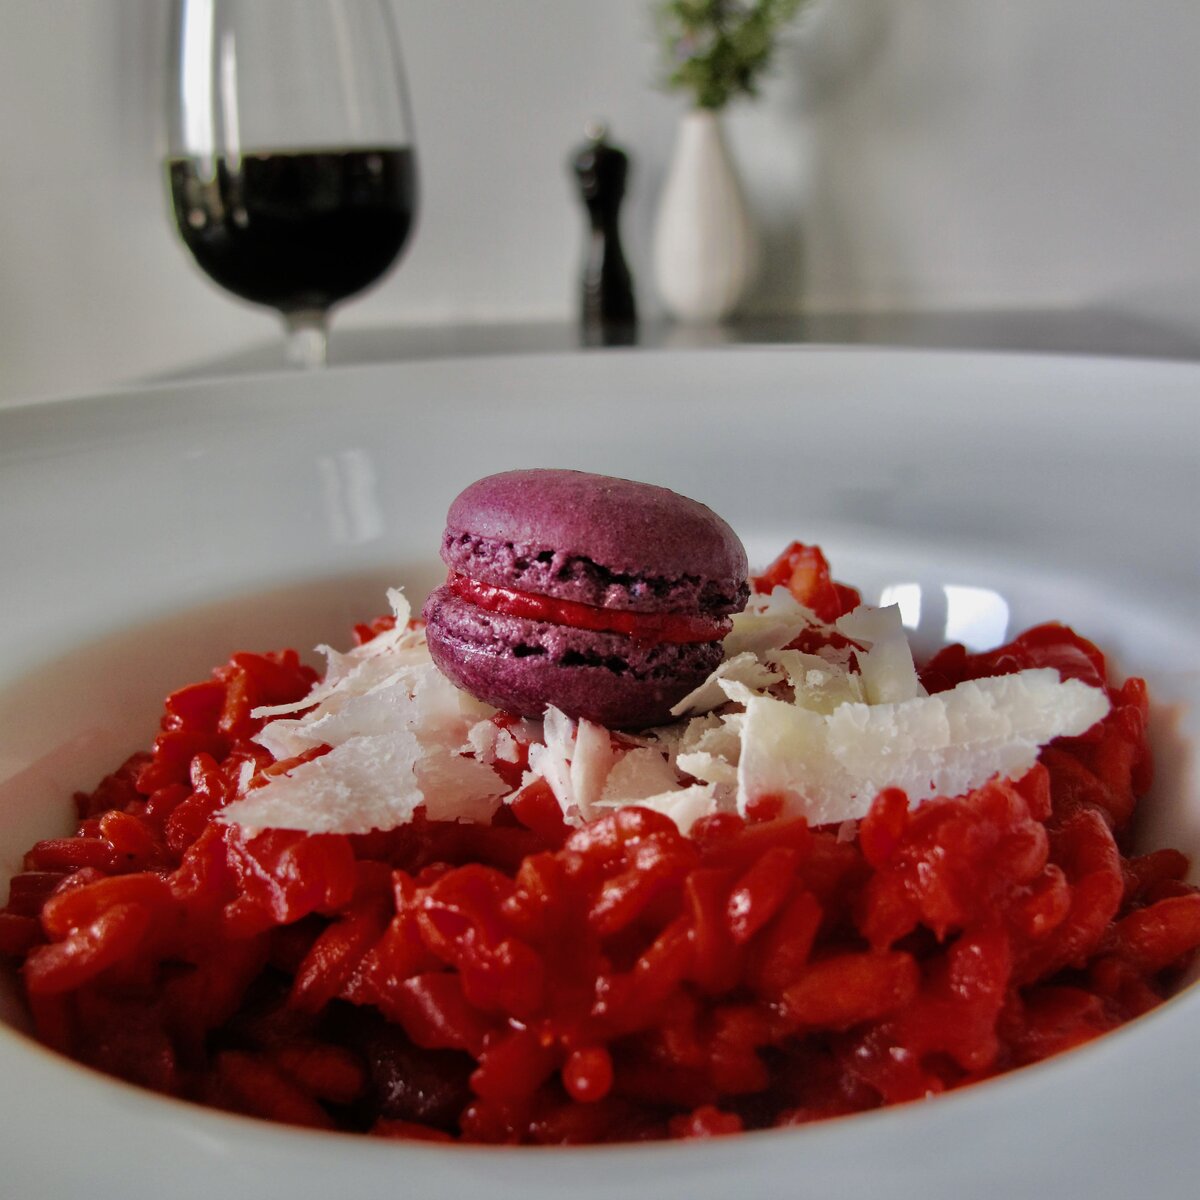 beet risotto with macaron and glass red wine